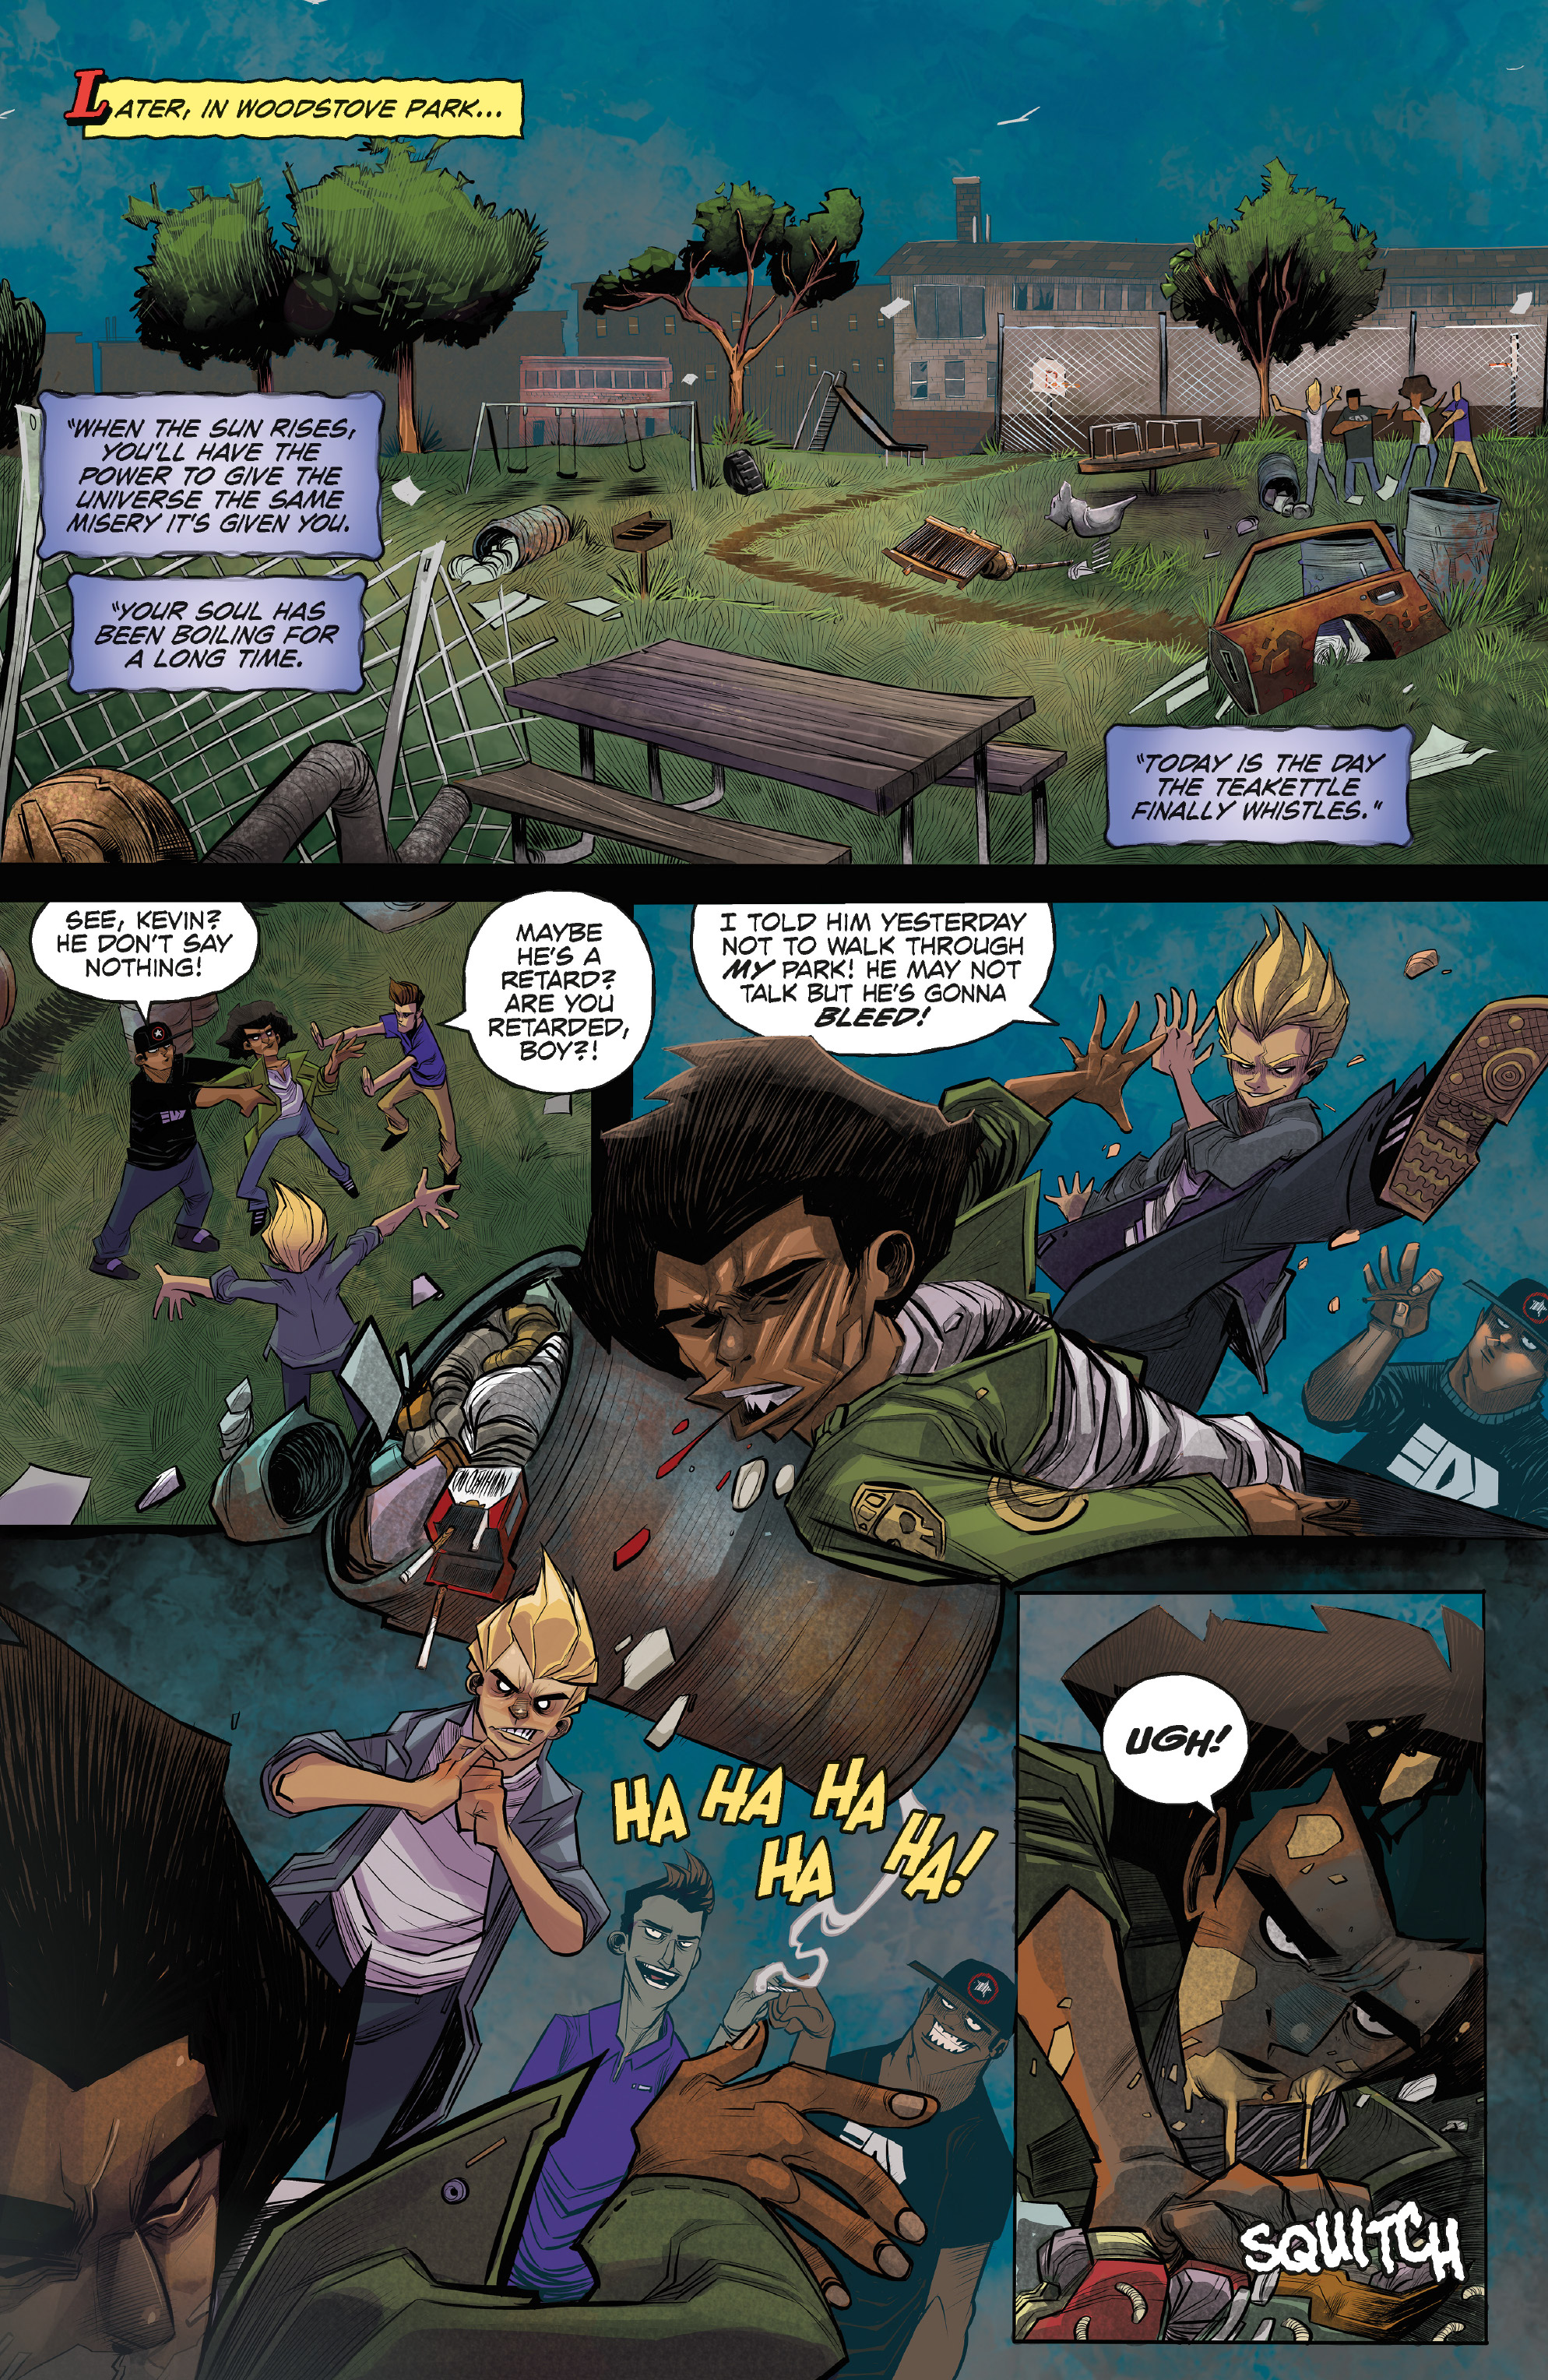 The Quiet Kind (2019): Chapter 1 - Page 4